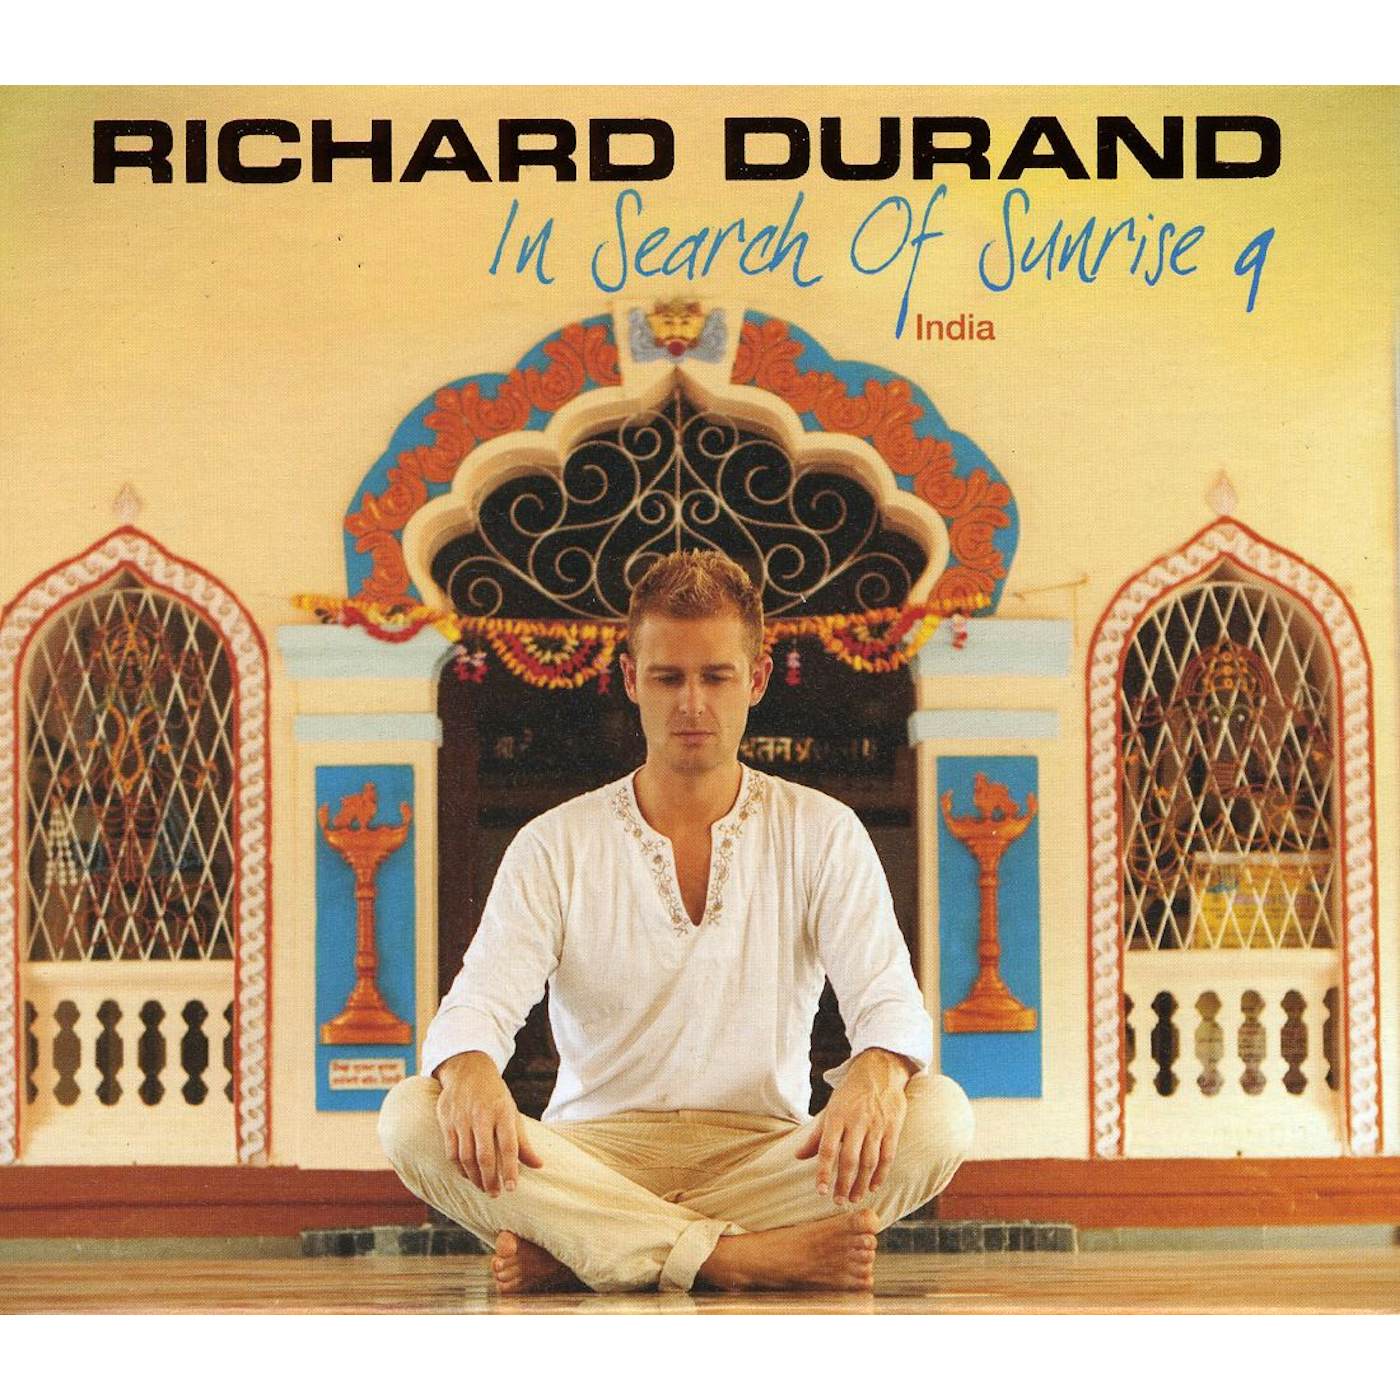 Richard Durand INSEARCH OF SUNRISE 9: INDIA CD